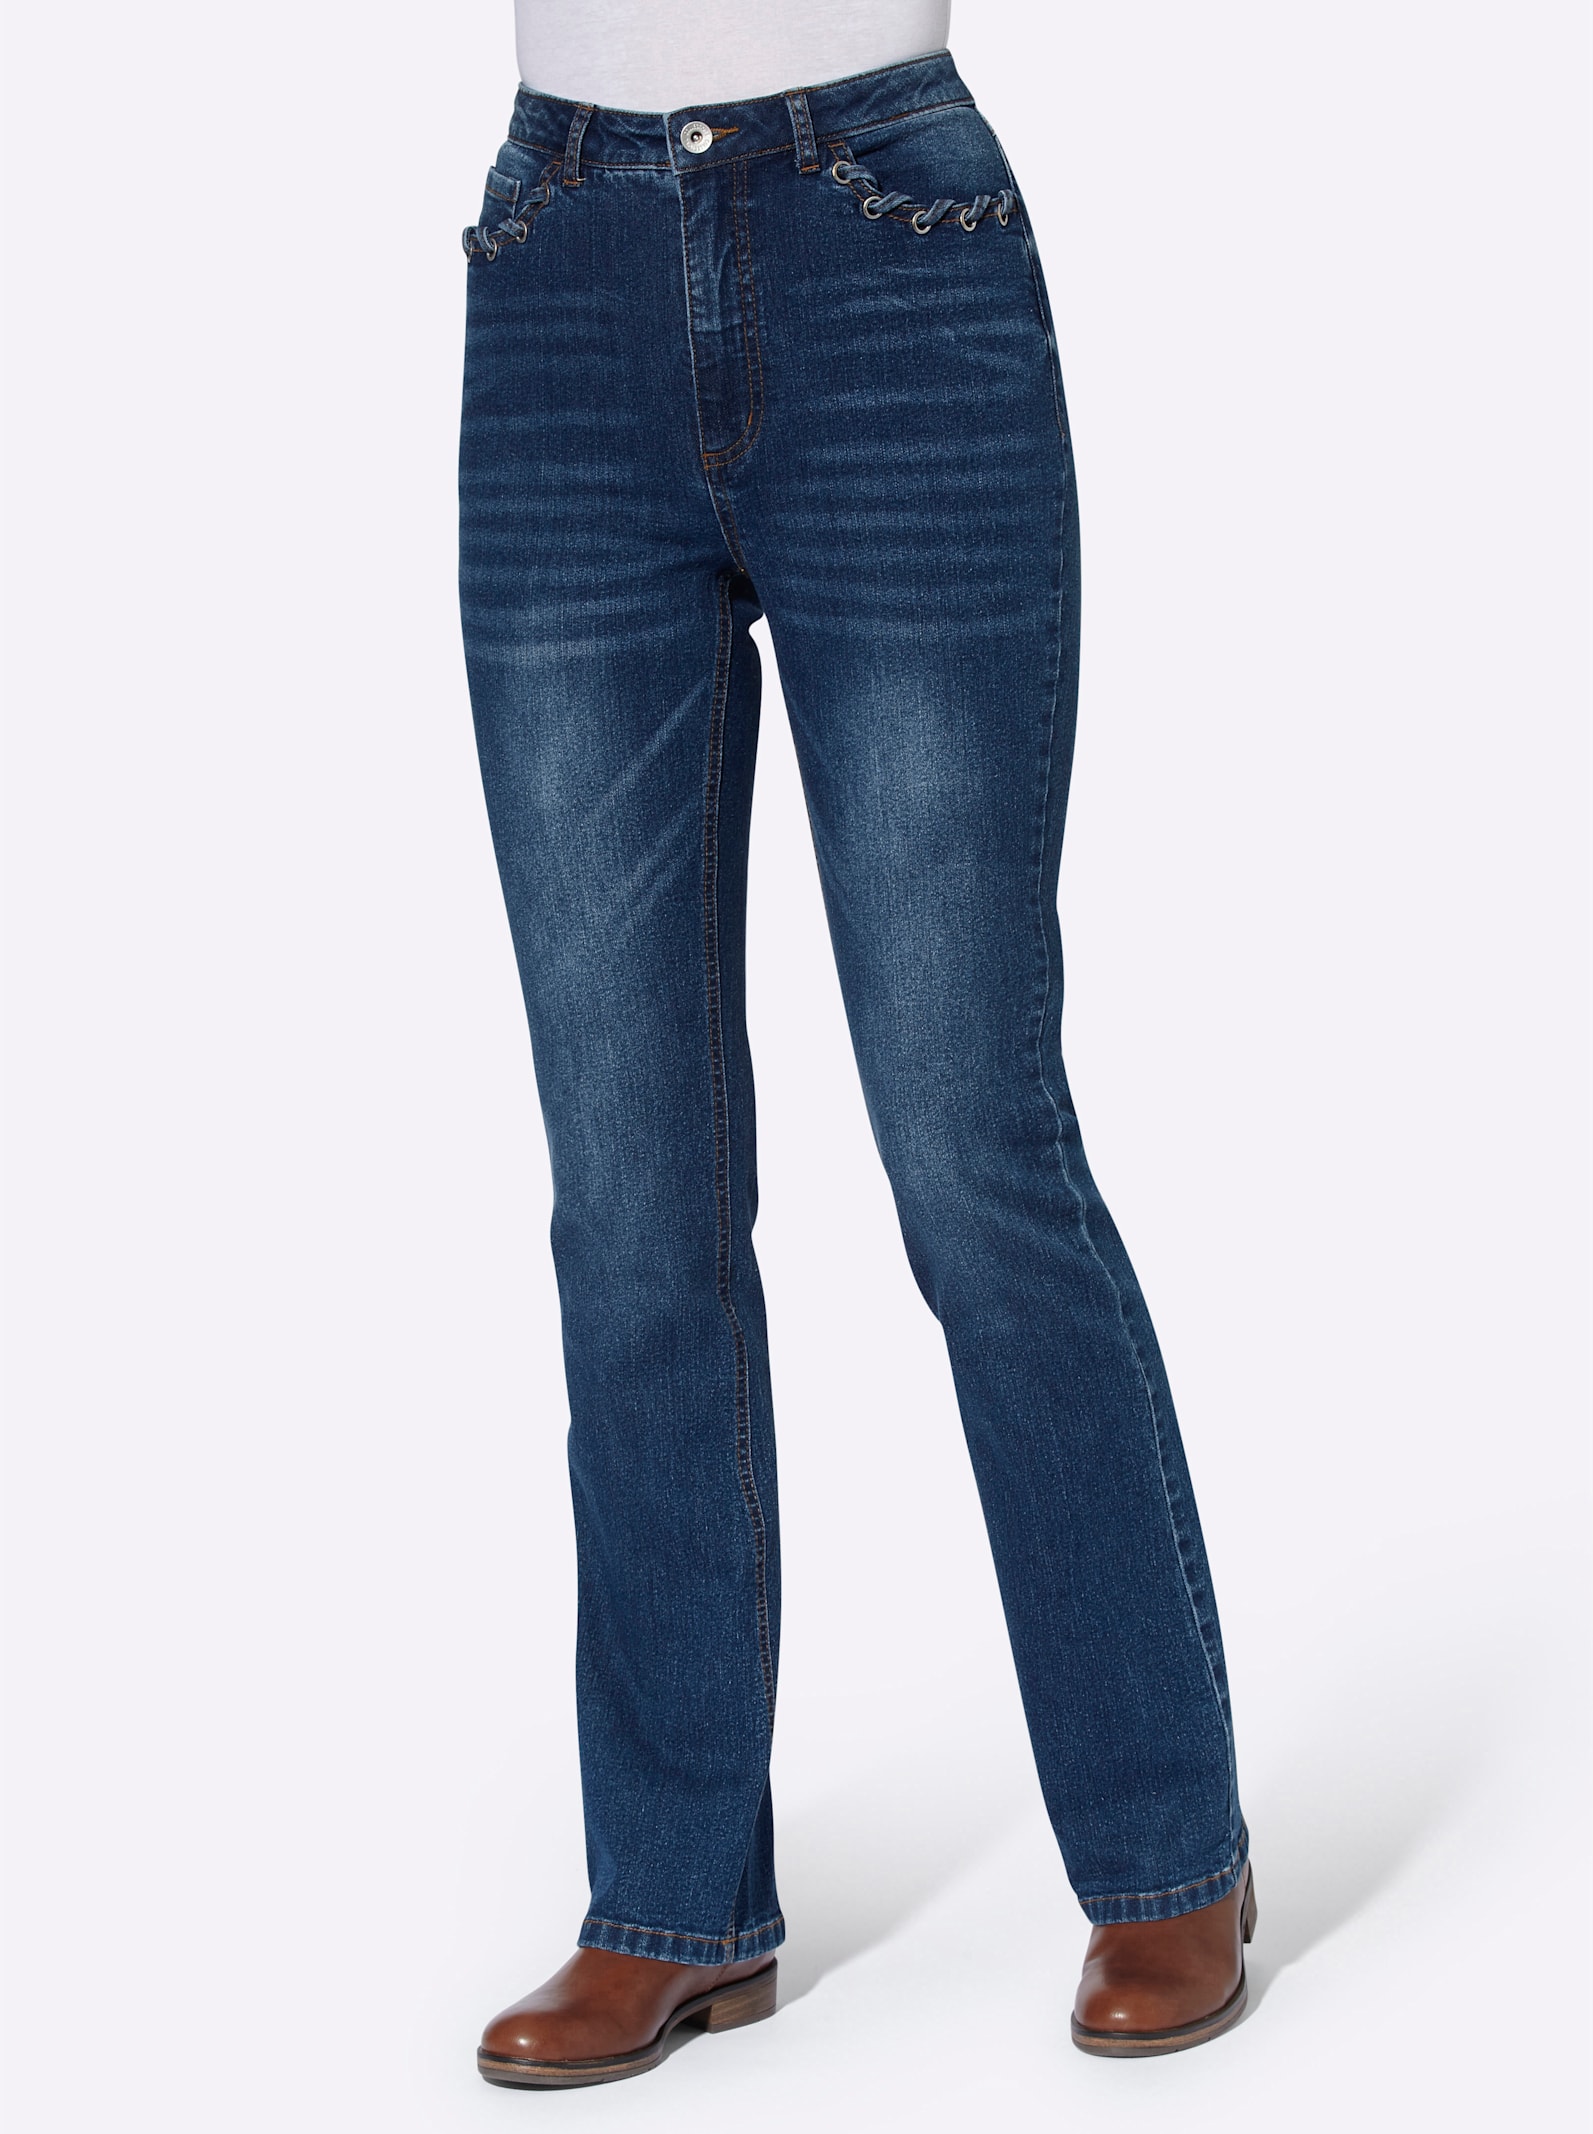 Vidjeans - blue-stone-washed